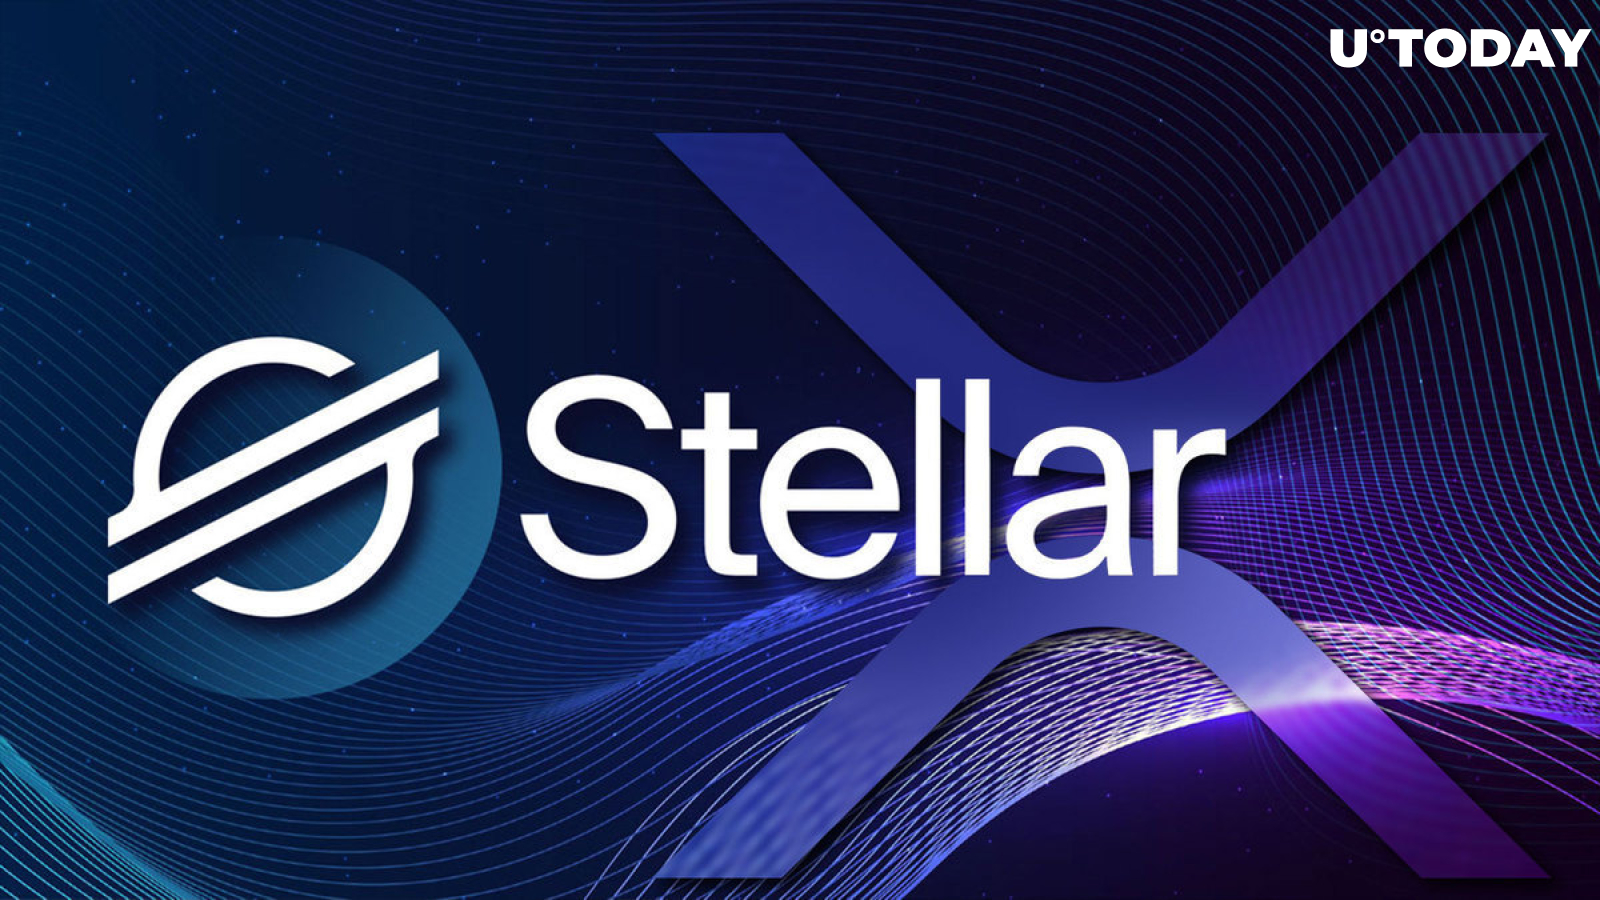 Stellar (XLM) Outshines XRP, Here Is Likely Reason